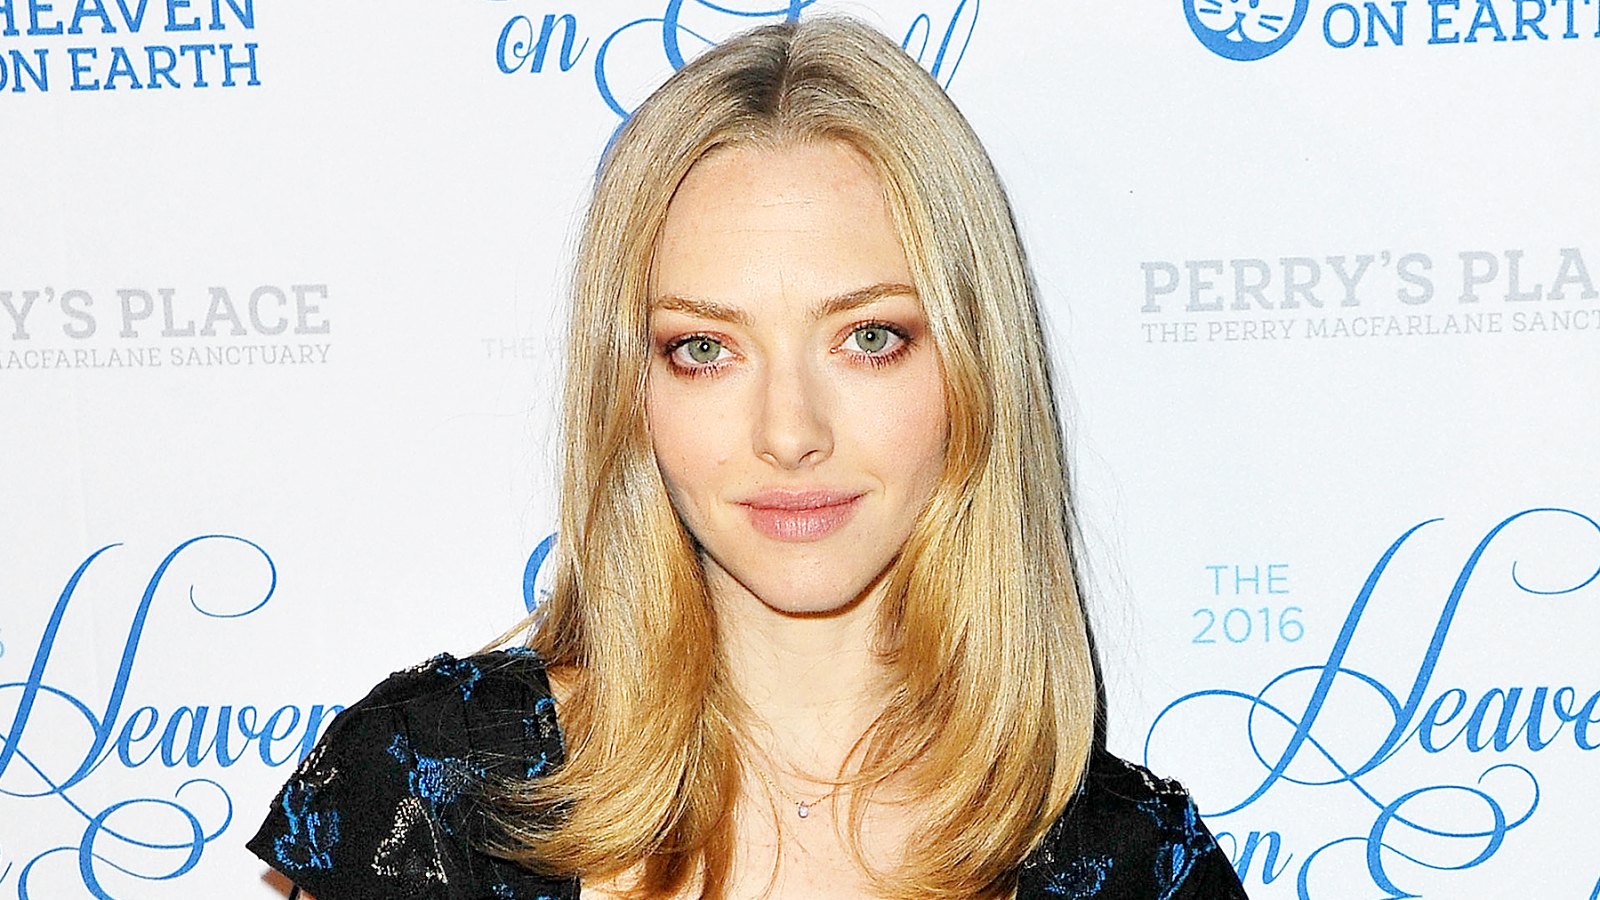 Amanda Seyfried arrives at the 2016 Heaven On Earth Gala at The Garland on September 24, 2016 in North Hollywood, California.